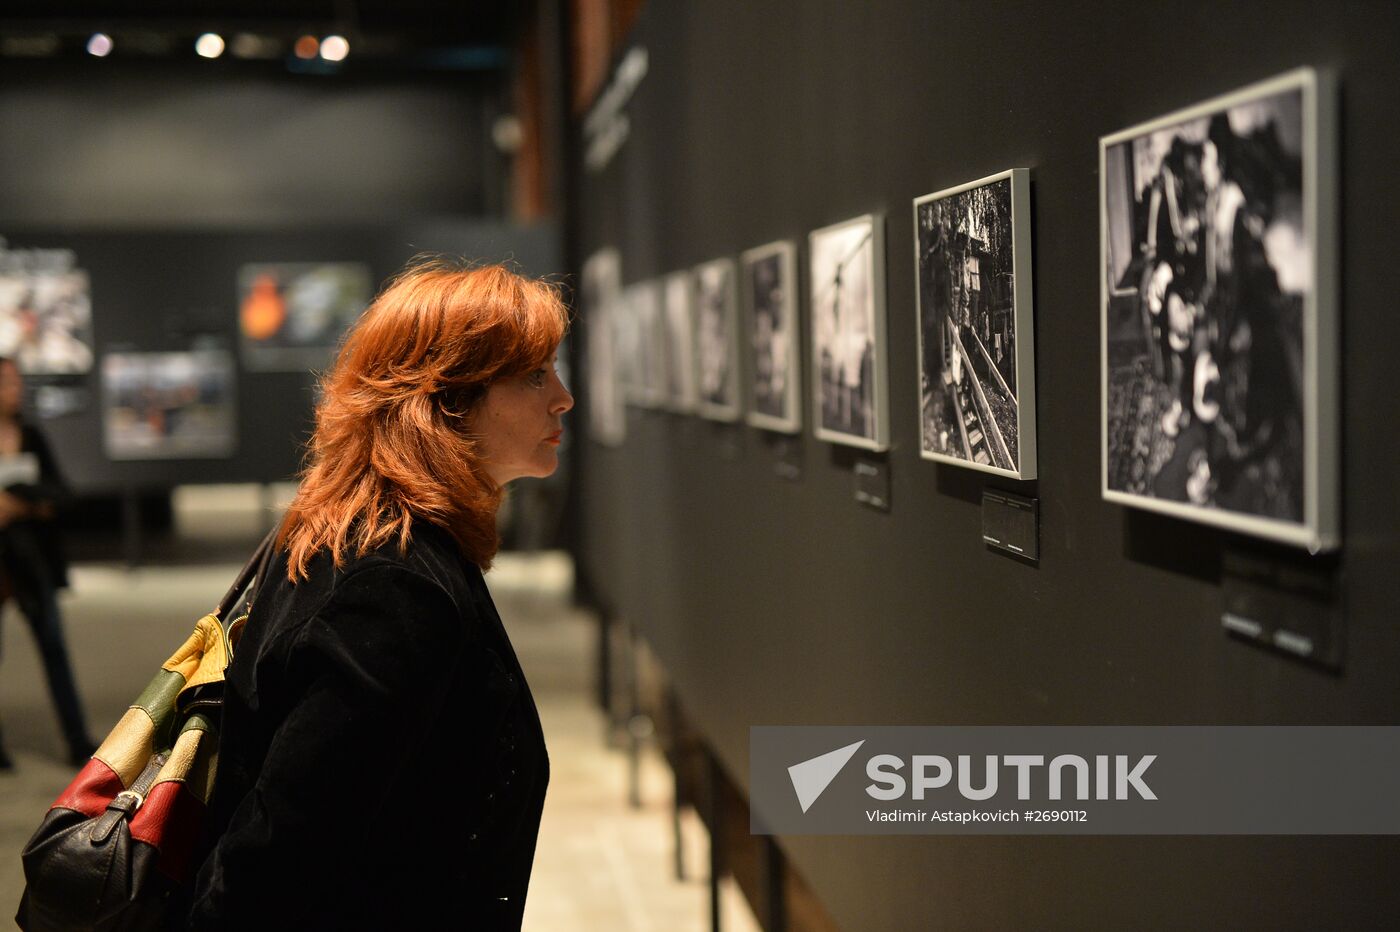 Opening of the exhibition "So that you know"